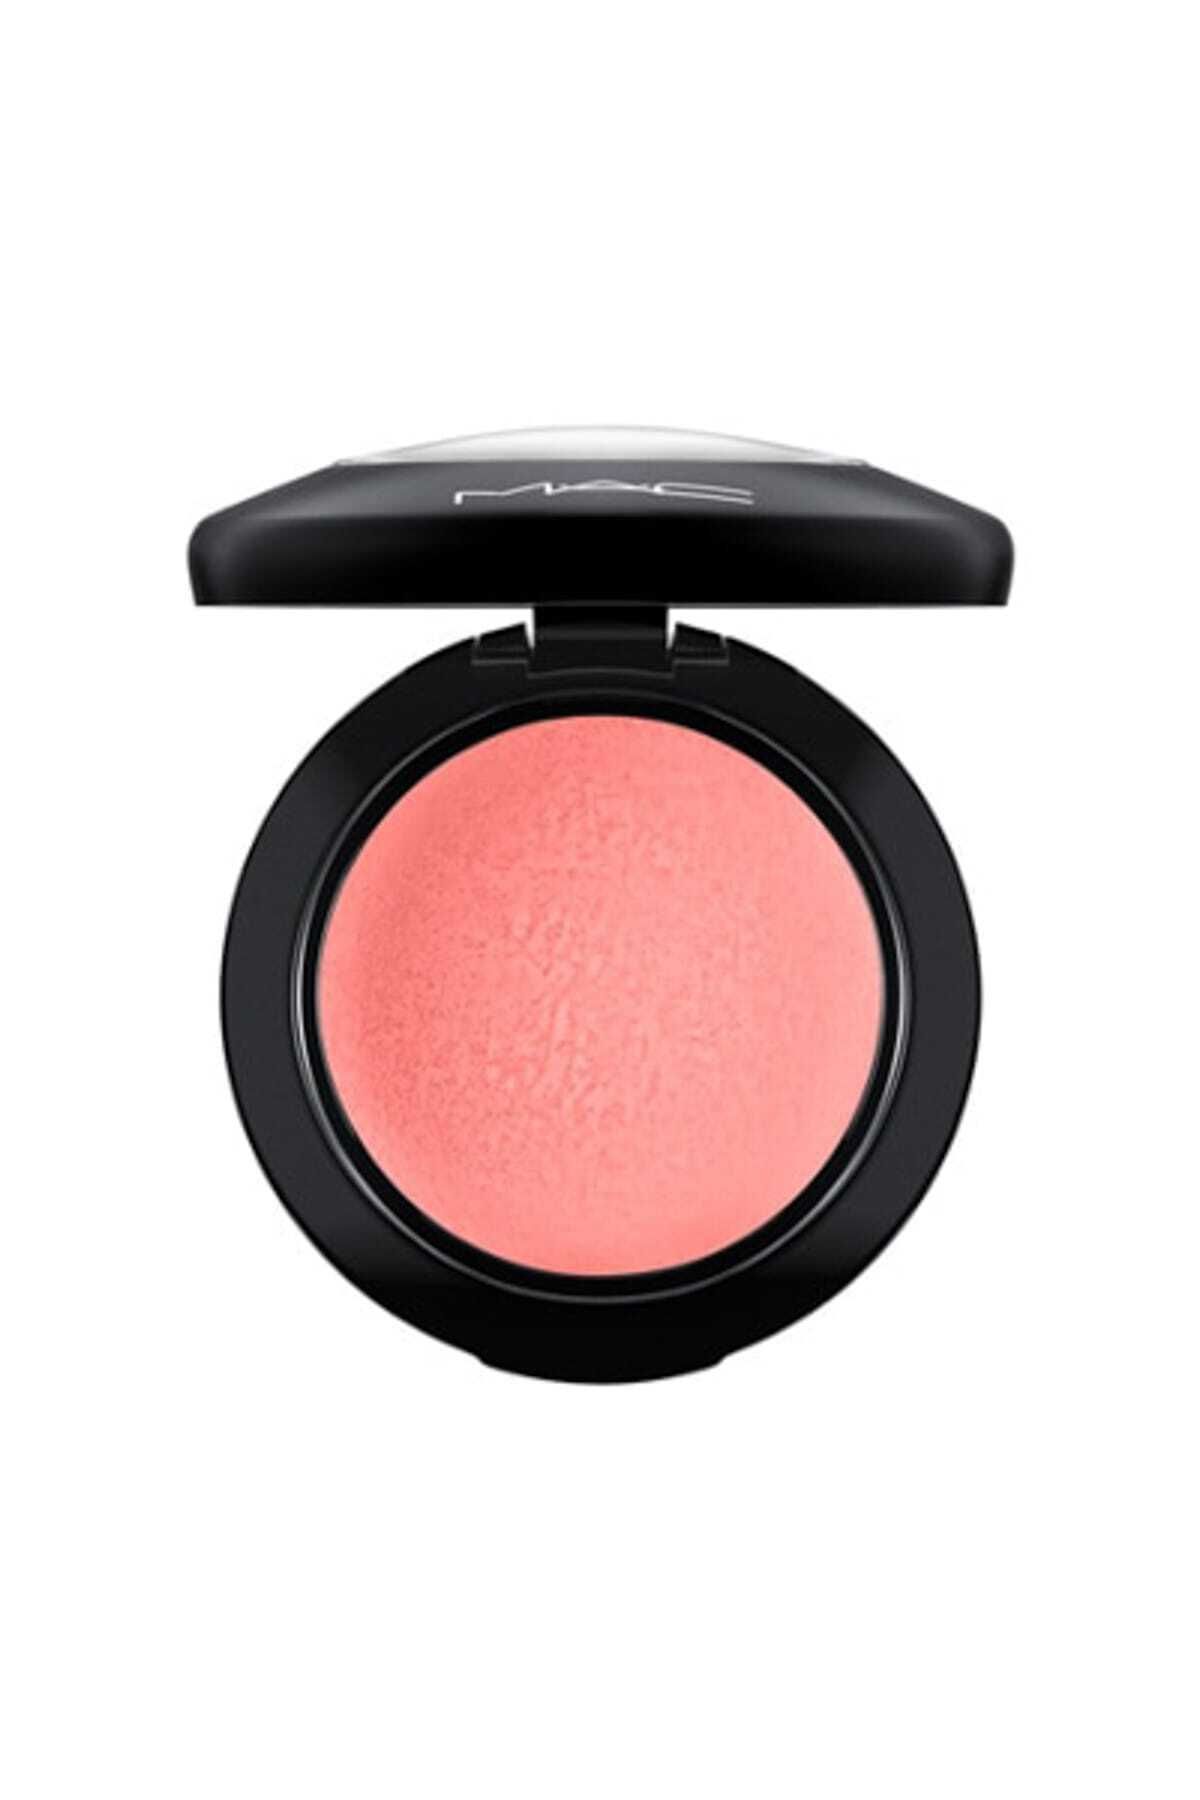 Mac BLUSH - INTENSELY PİGMENTED MİNERALİZED BLUSH HEY, CORAL, HEY... 3.5 G KEYON1879